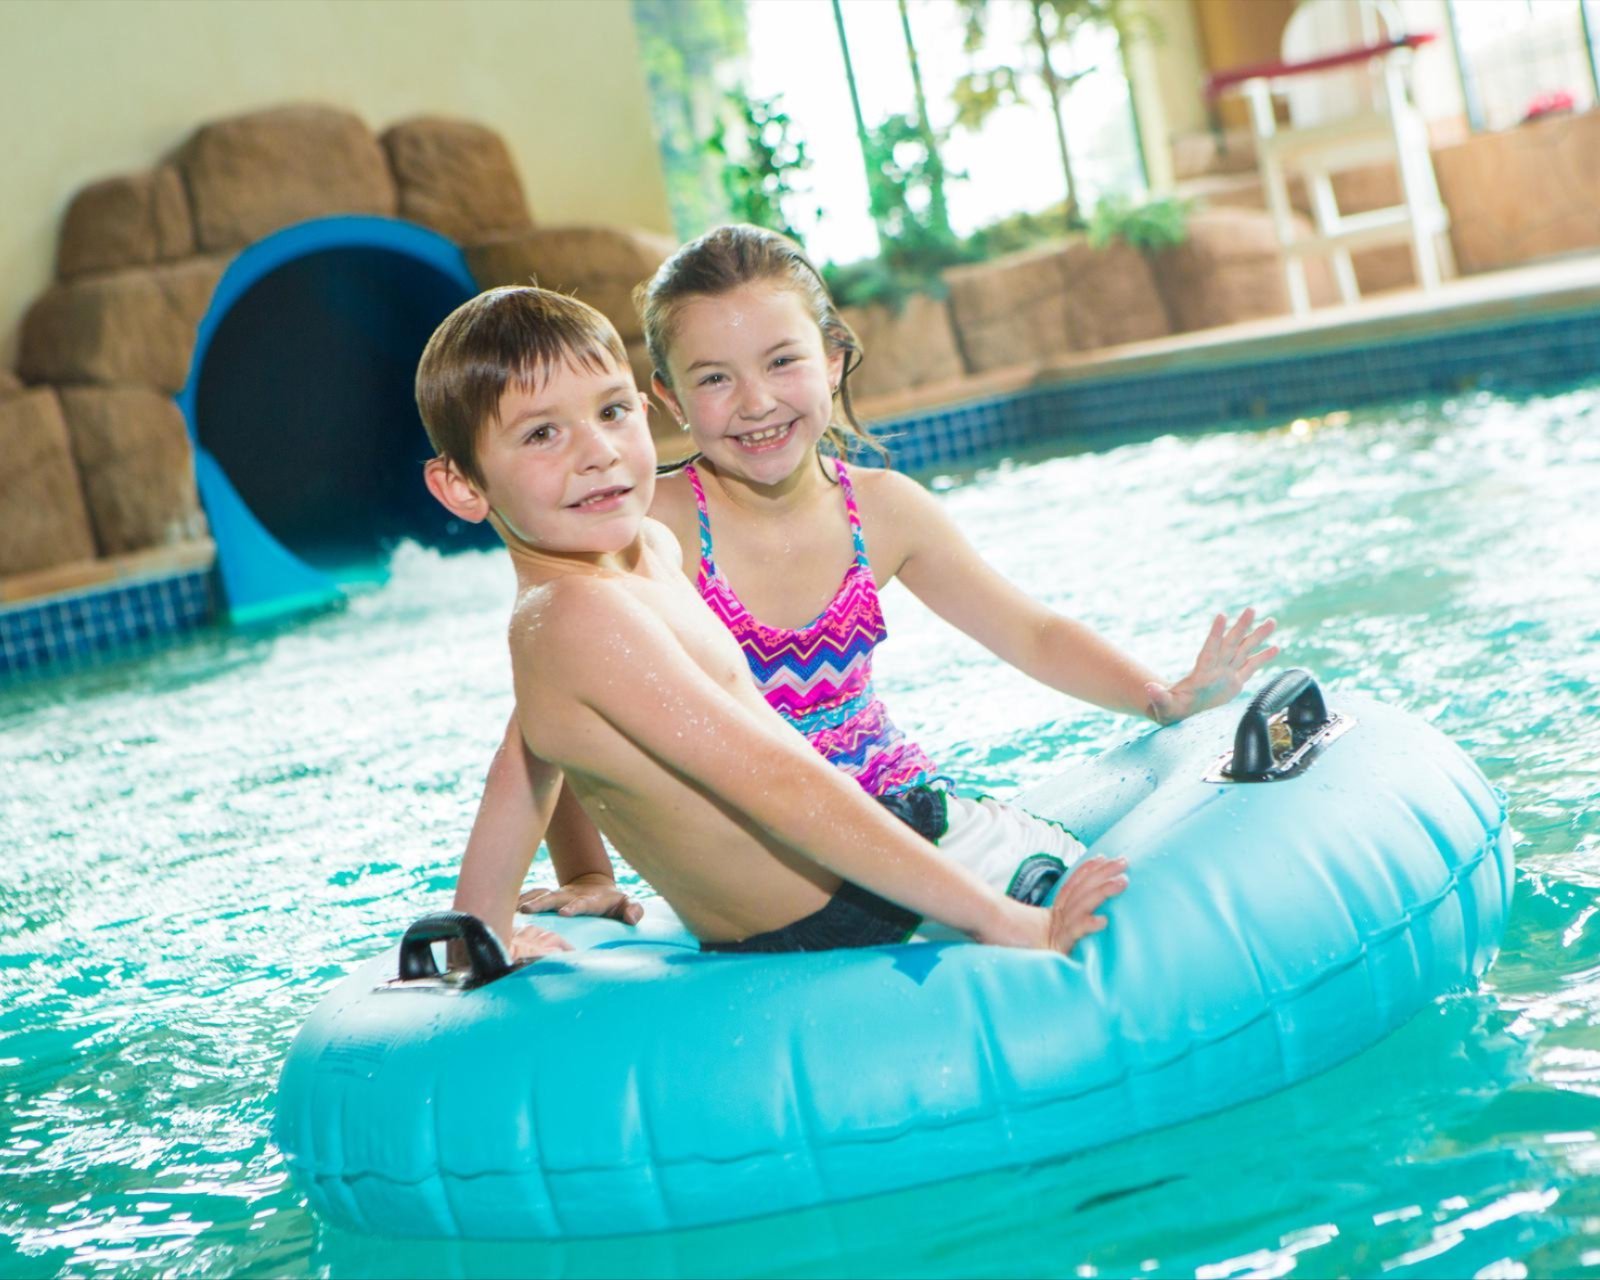 Waterpark fun for the kids at Tundra Lodge Resort and Waterpark